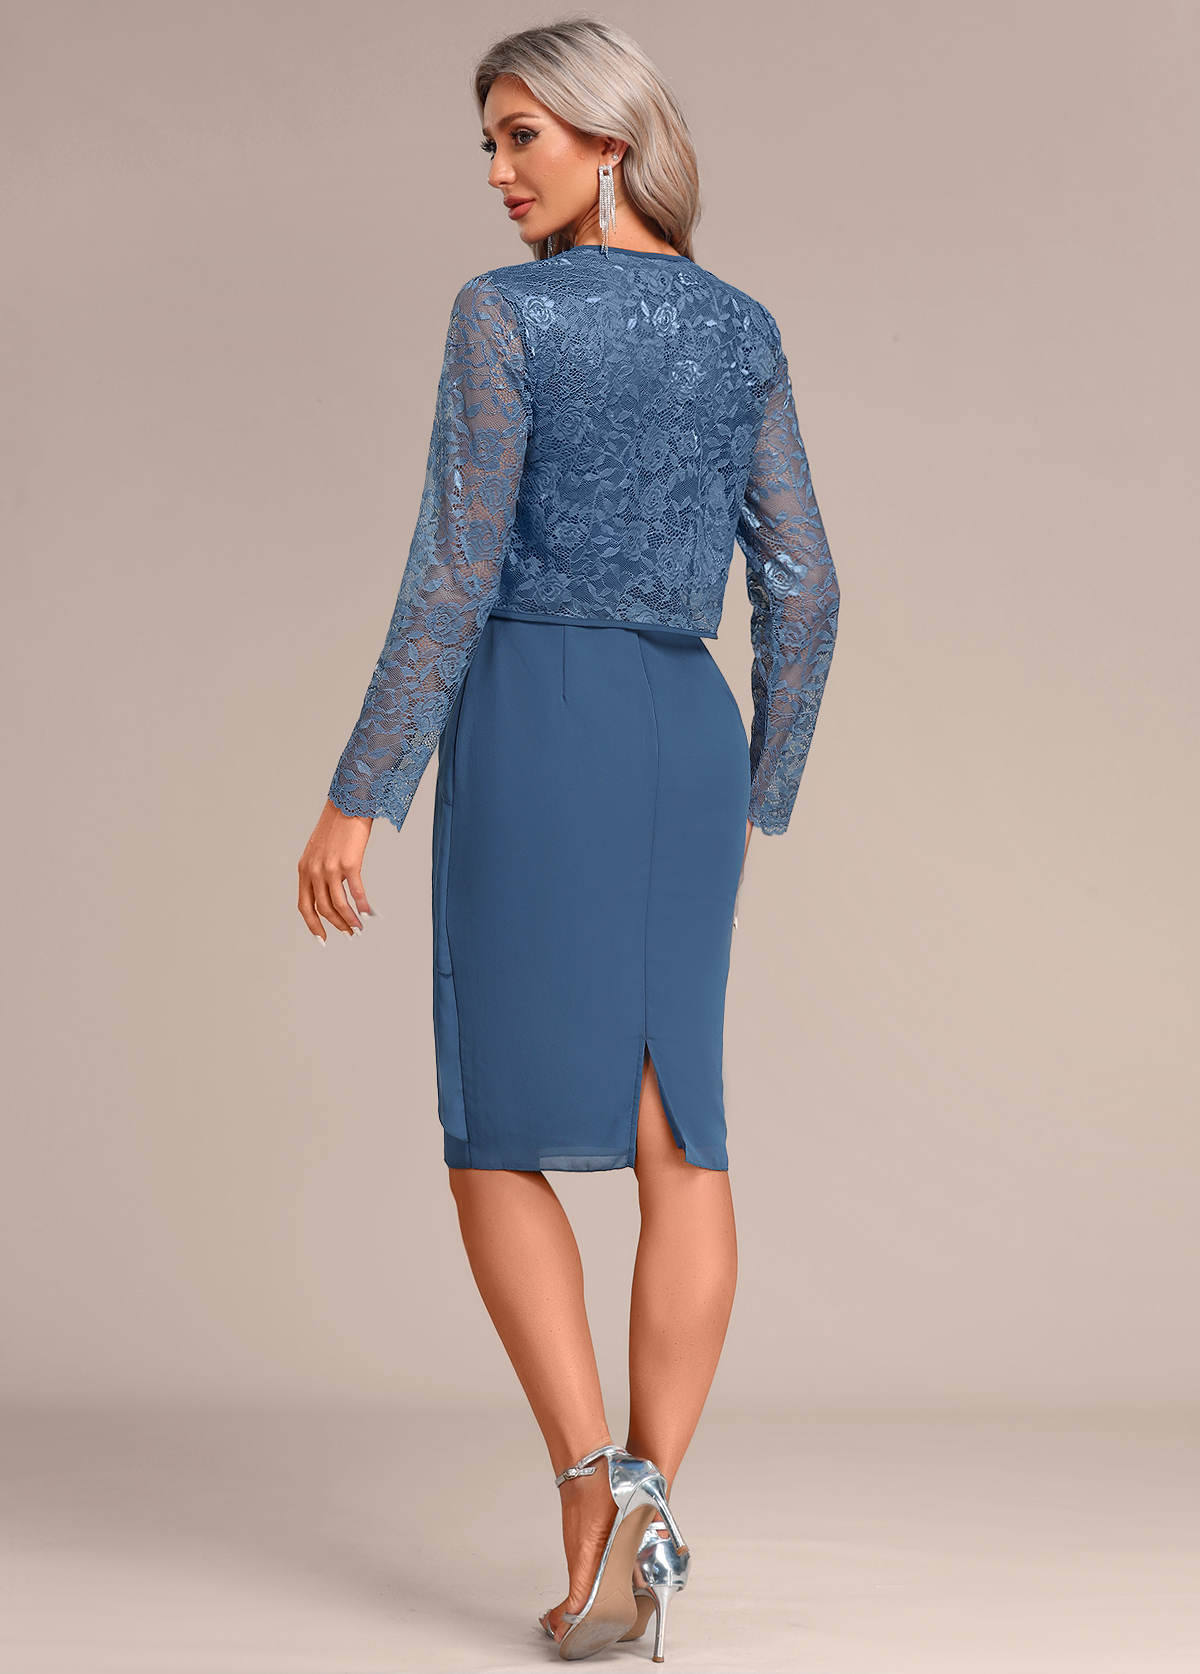 Peacock Blue Layered Two Piece Suit Dress and Cardigan